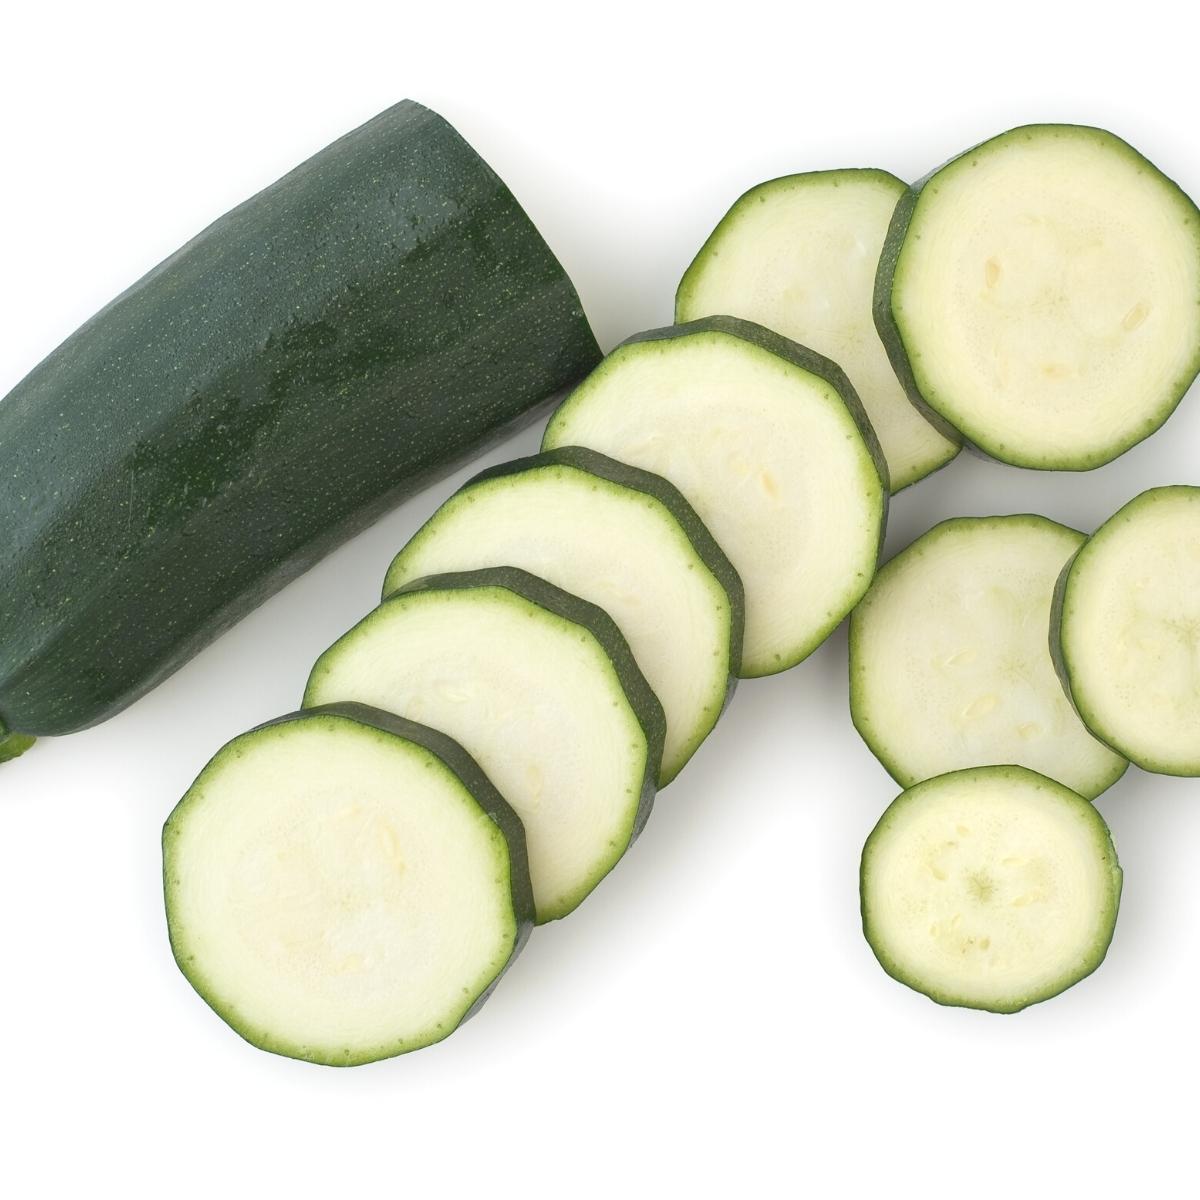 zucchini instead of celery in cooked dishes.